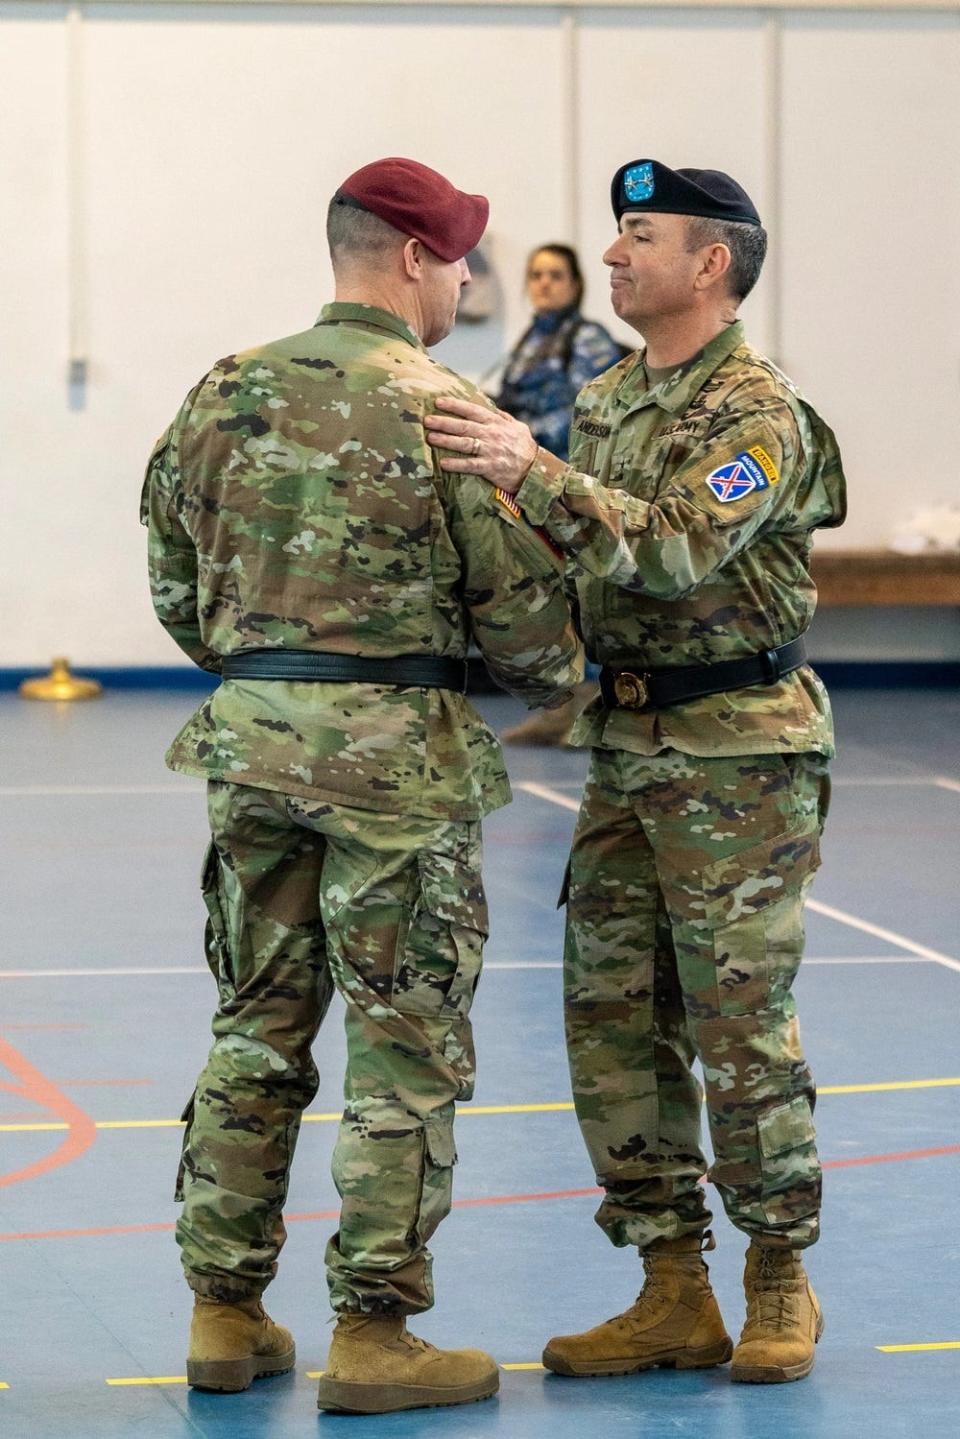 Maj. Gen. Gregory K. Anderson, right, commander of the 10th Mountain Division and "Task Force Mountain", and Maj. Gen. Pat Work, left, commander of the 82nd Airborne Division and "Task Force 82", shake hands during a Dec. 15, 2023, transfer of authority ceremony hosted by the U.S. Army’s V Corps, at Mihail Kogalniceanu Air Base, Romania.